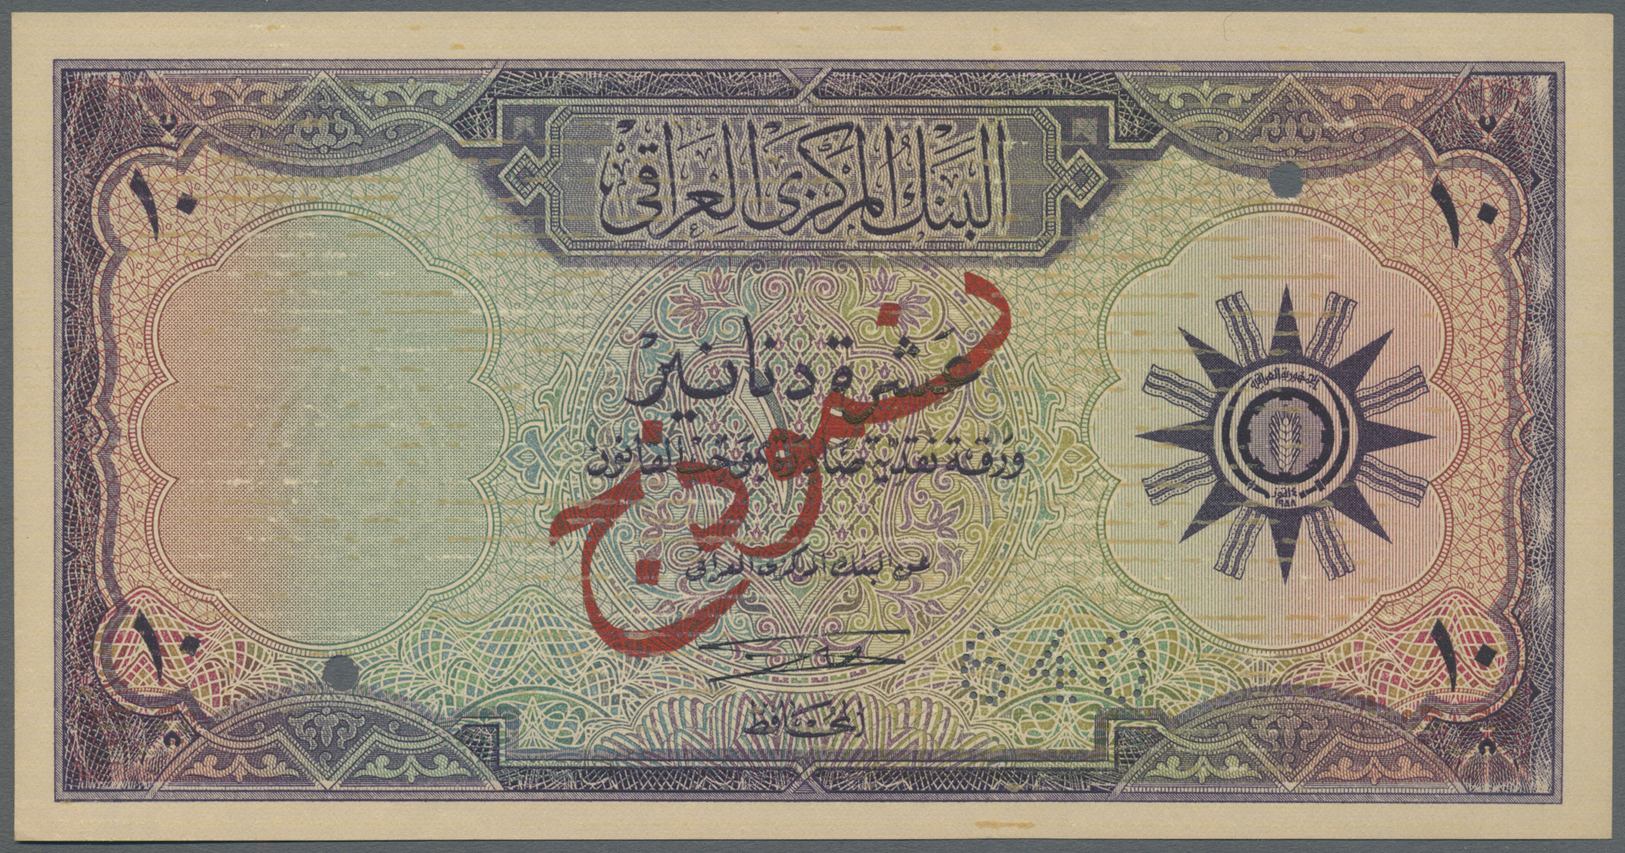 01225 Iraq / Irak: Set Of 2 Pcs SPECIMEN Banknotes 10 Dinars ND P. 55s, Both With Specimen Overprints In Arabic And West - Iraq